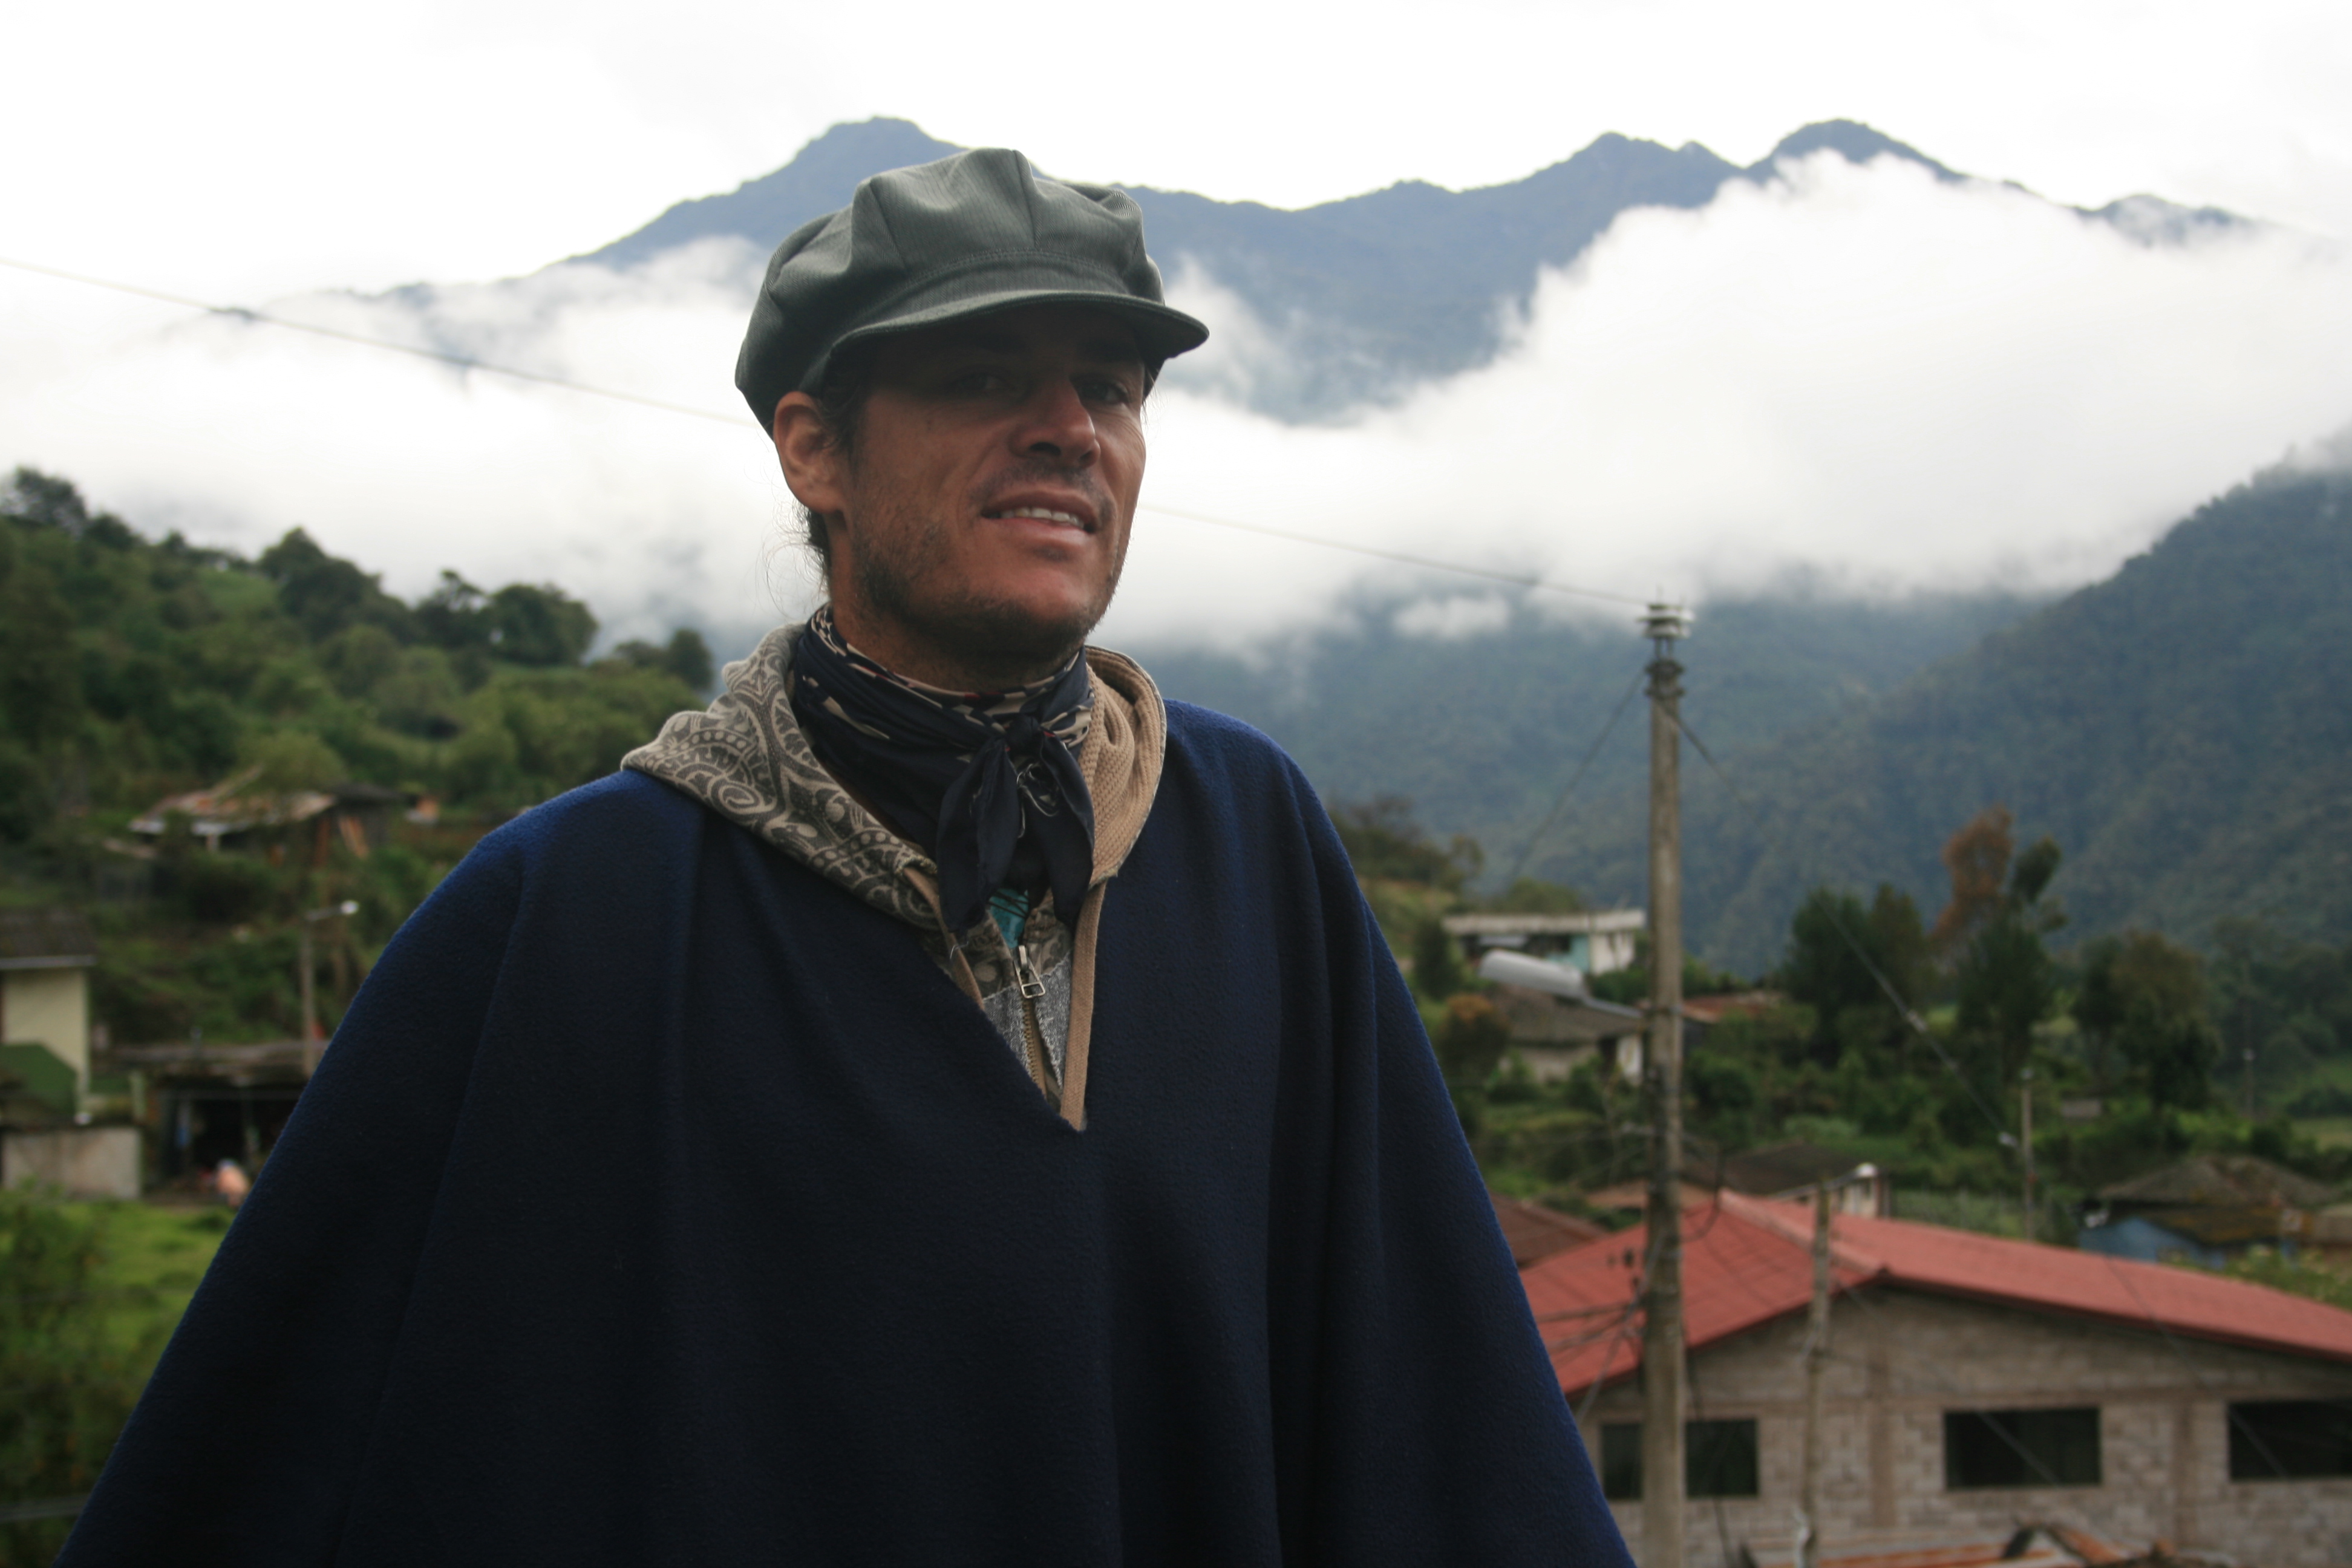 'Searching South America' feature film, Chesex hides out in Pappallata, Ecuador